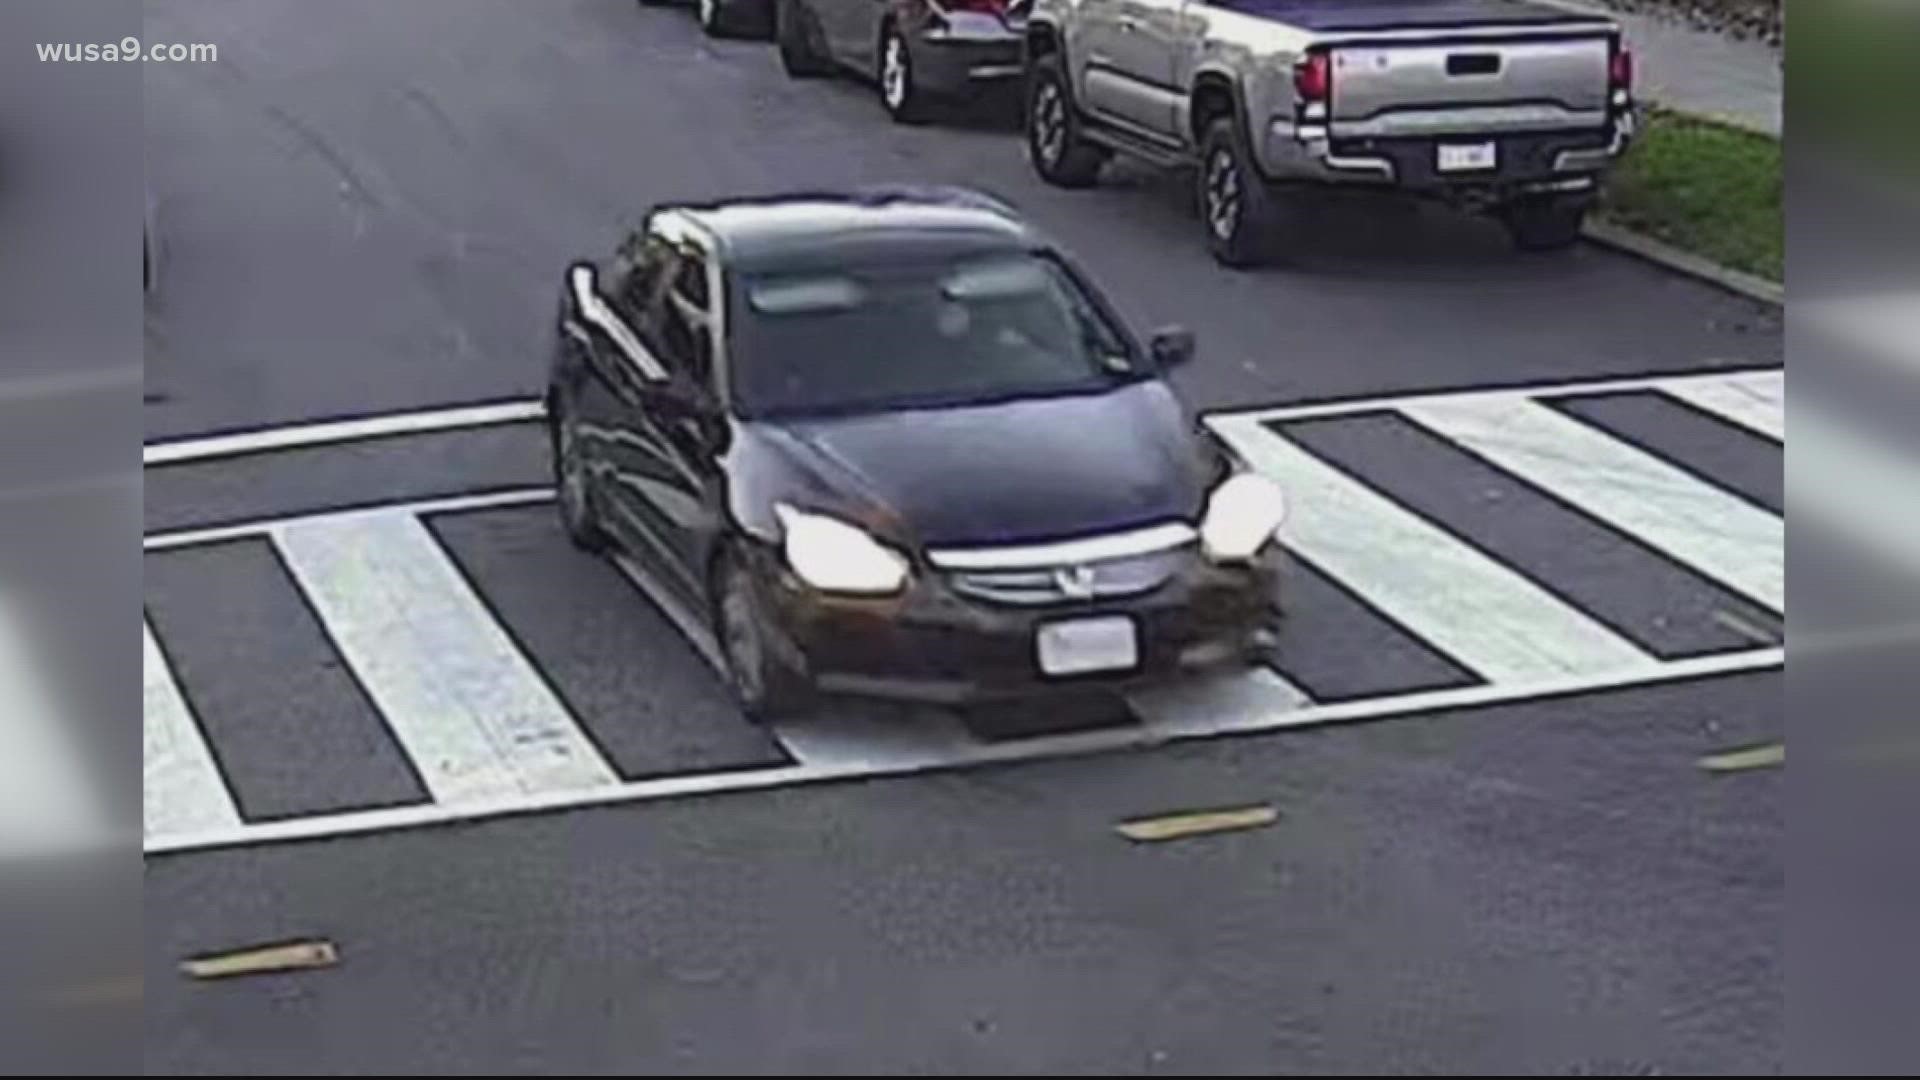 DC Police Chief Robert Contee said that investigators are looking for a dark-colored Honda Accord that may have been involved in the shooting.